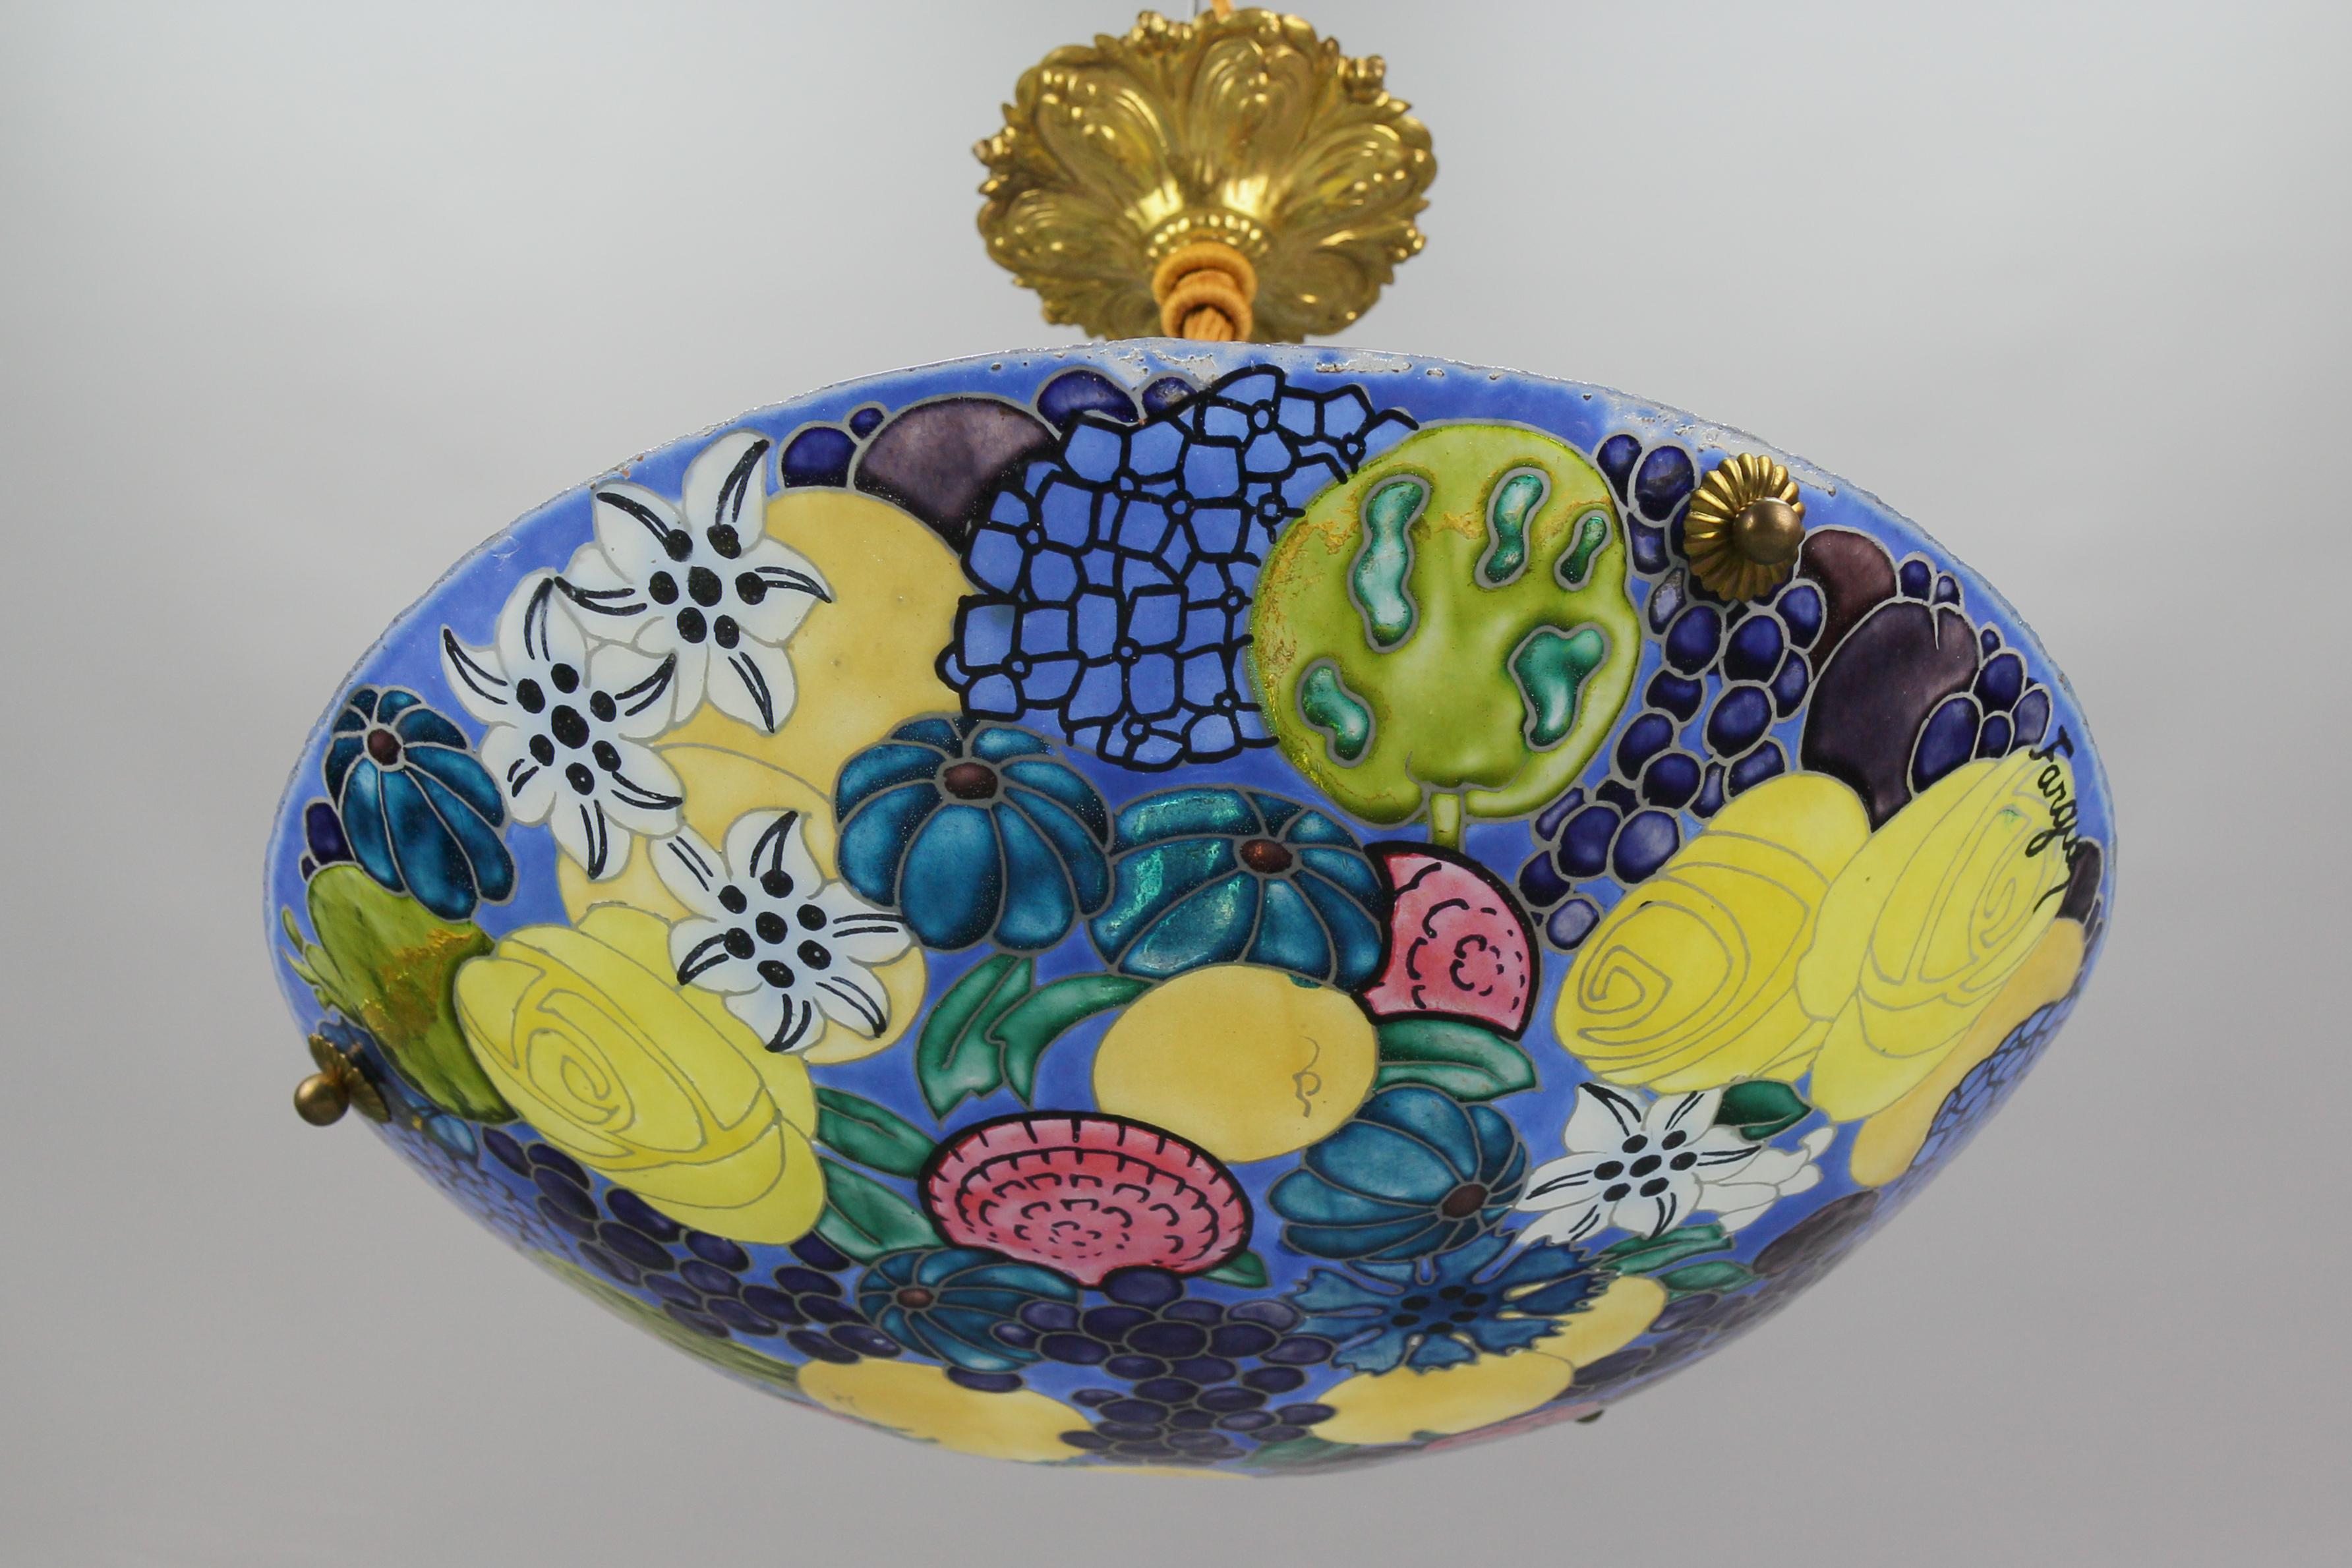 French Art Nouveau painted enameled glass pendant light with flower and fruit motifs, signed Fargue, from the 1930s.
A wonderful pendant ceiling light fixture from circa the 1930s. The beautifully painted enameled glass bowl features flower and